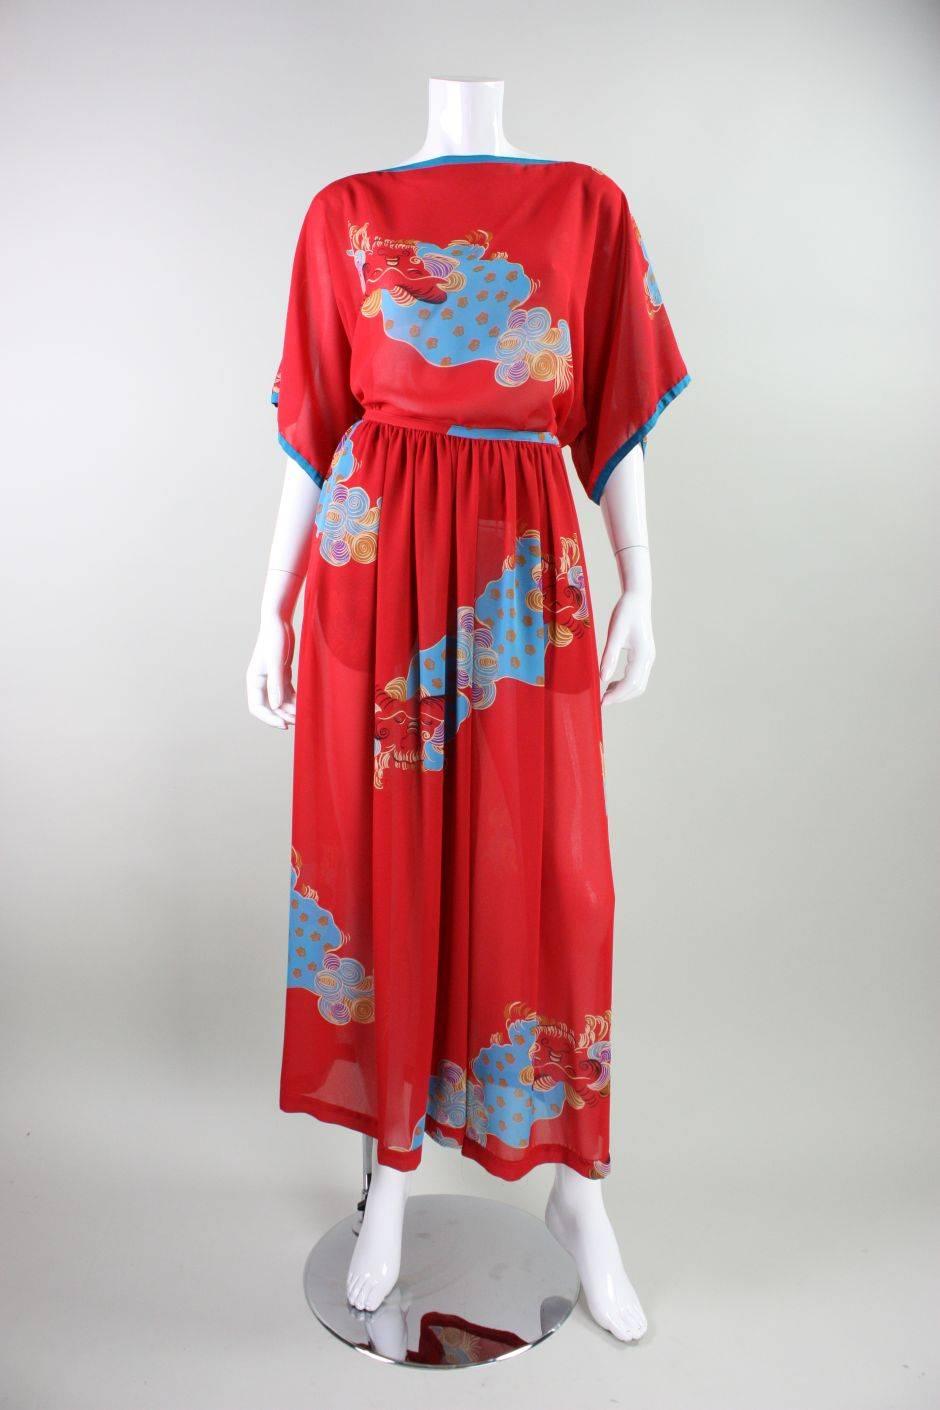 Vintage ensemble from Giorgio Sant Angelo dates to the 1980's and is made of a red synthetic crepe with an Asian-inspired motif.  Oversized blouse has a boat neck, slight batwing shape, and no closures.  Extremely wide-legged trousers have gathering